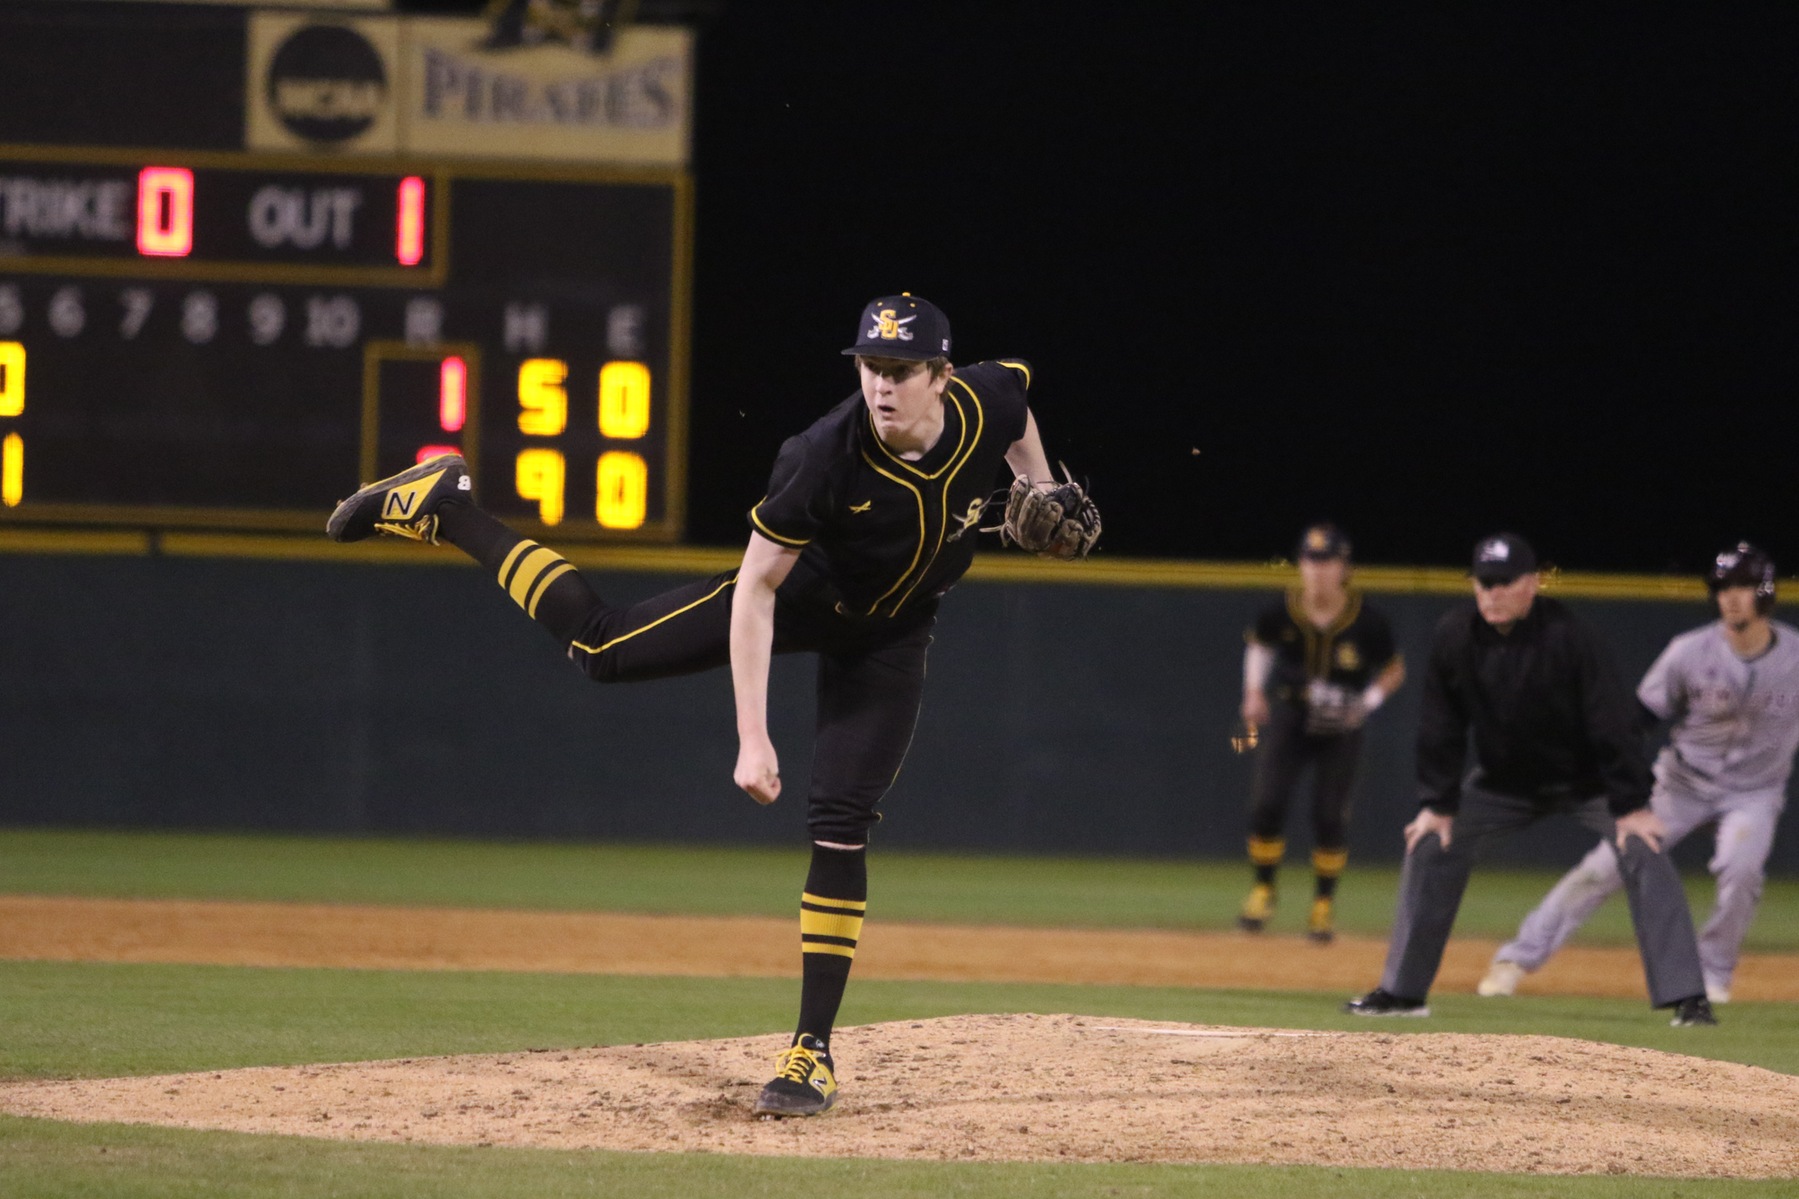 Southwestern and TLU Baseball Split Doubleheader with Strong Pitching Performances